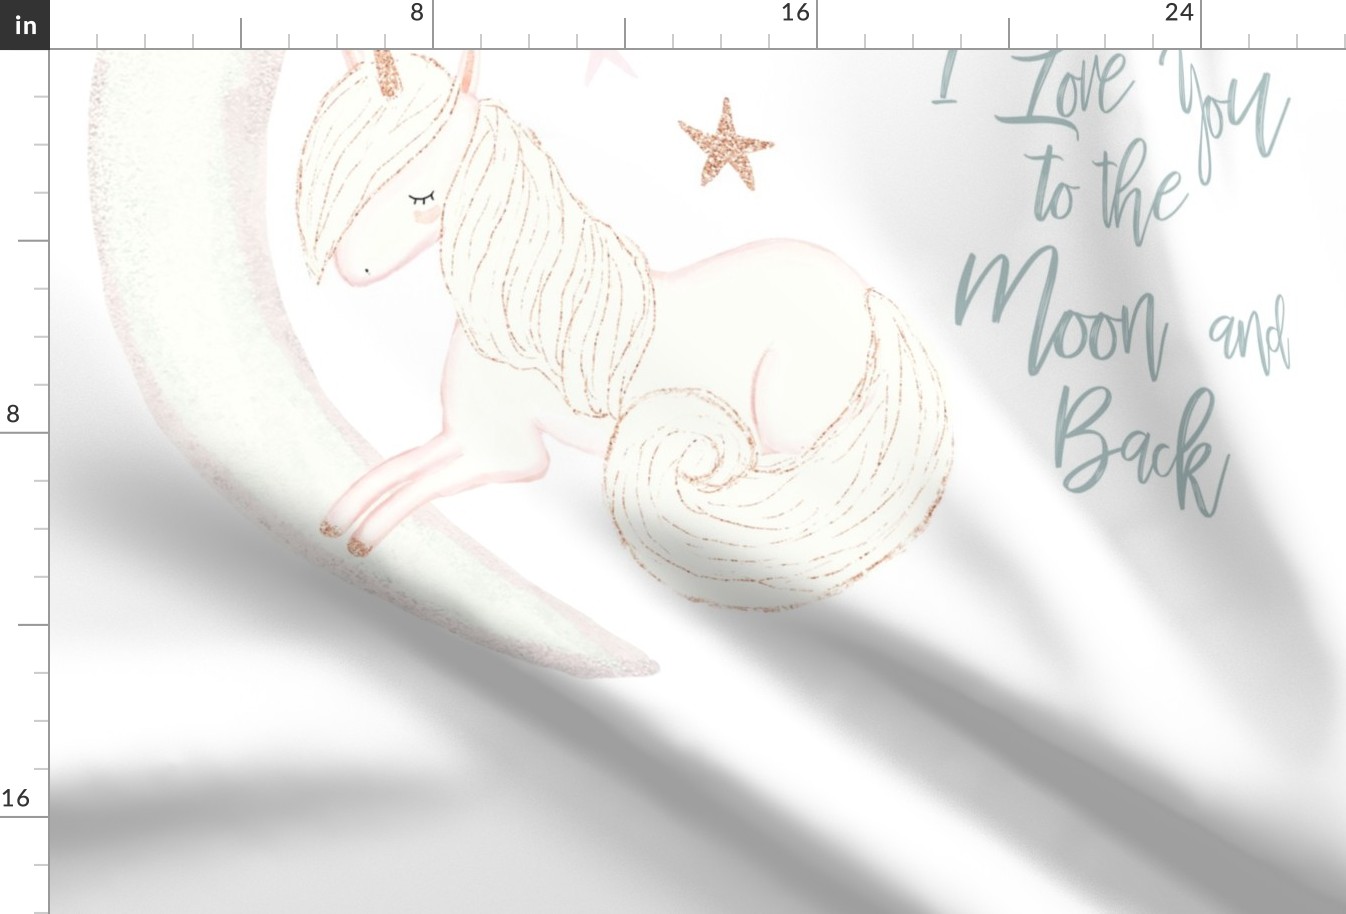 27" x 36" // Good Night Unicorn // I Love You to the Moon and Back